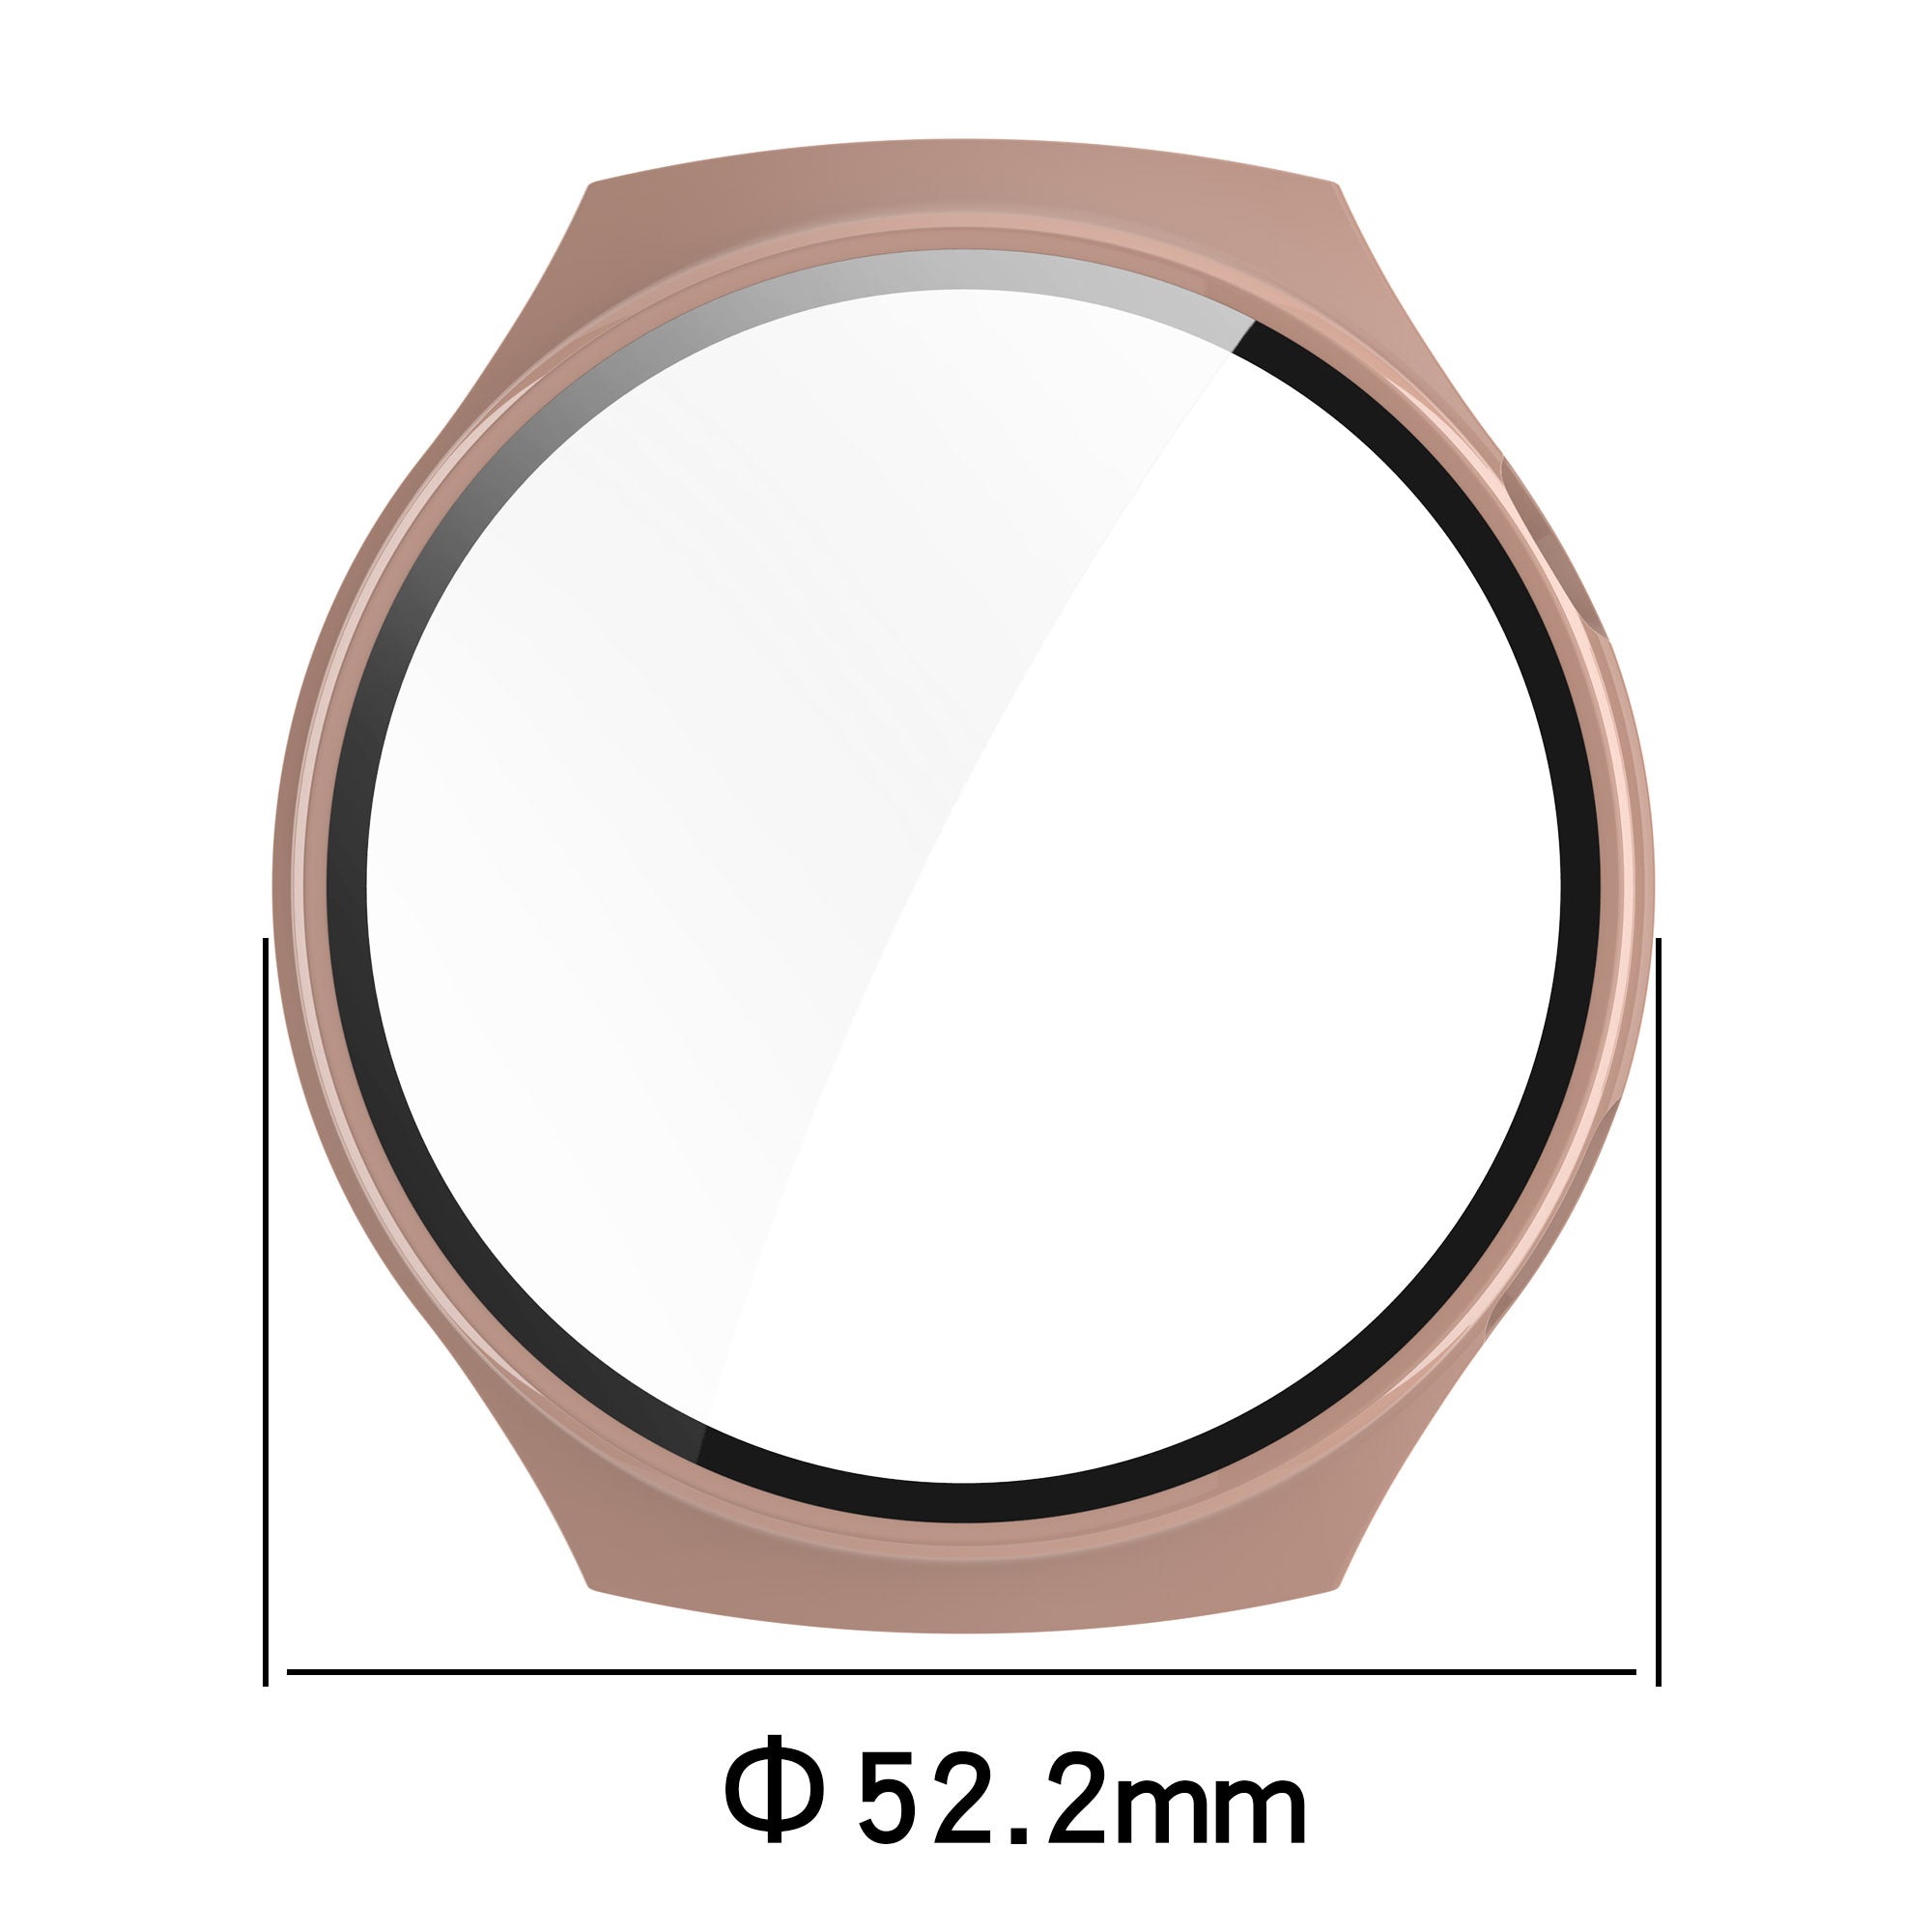 For Huawei Watch 4 Pro Case PC Cover with Curved Tempered Glass Screen Protector - Beige